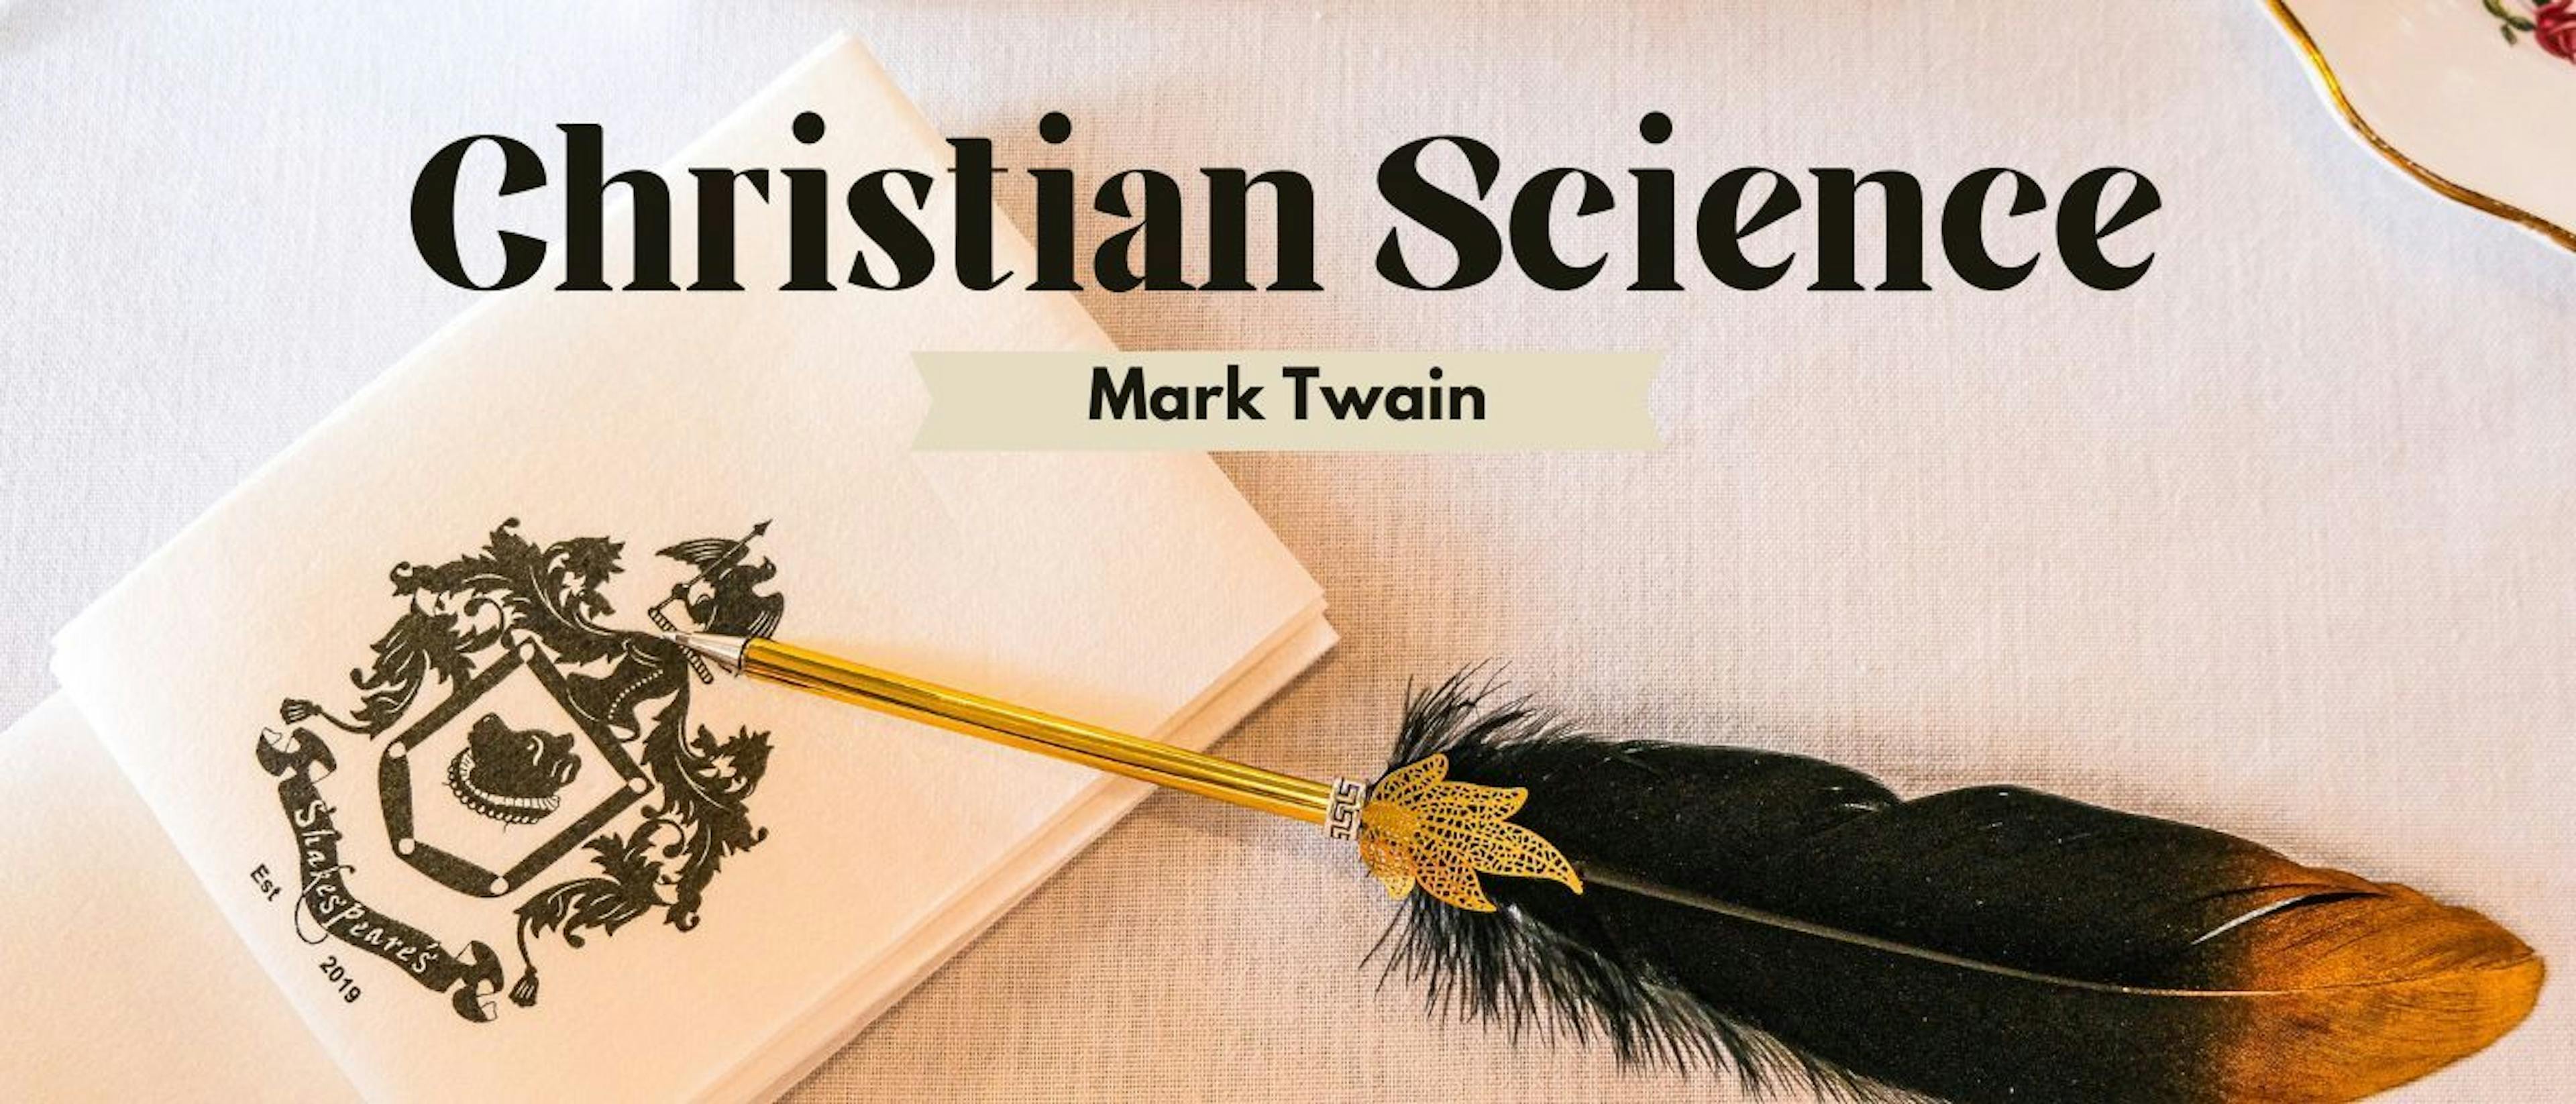 featured image - THE CHRISTIAN SCIENCE PUBLISHING SOCIETY